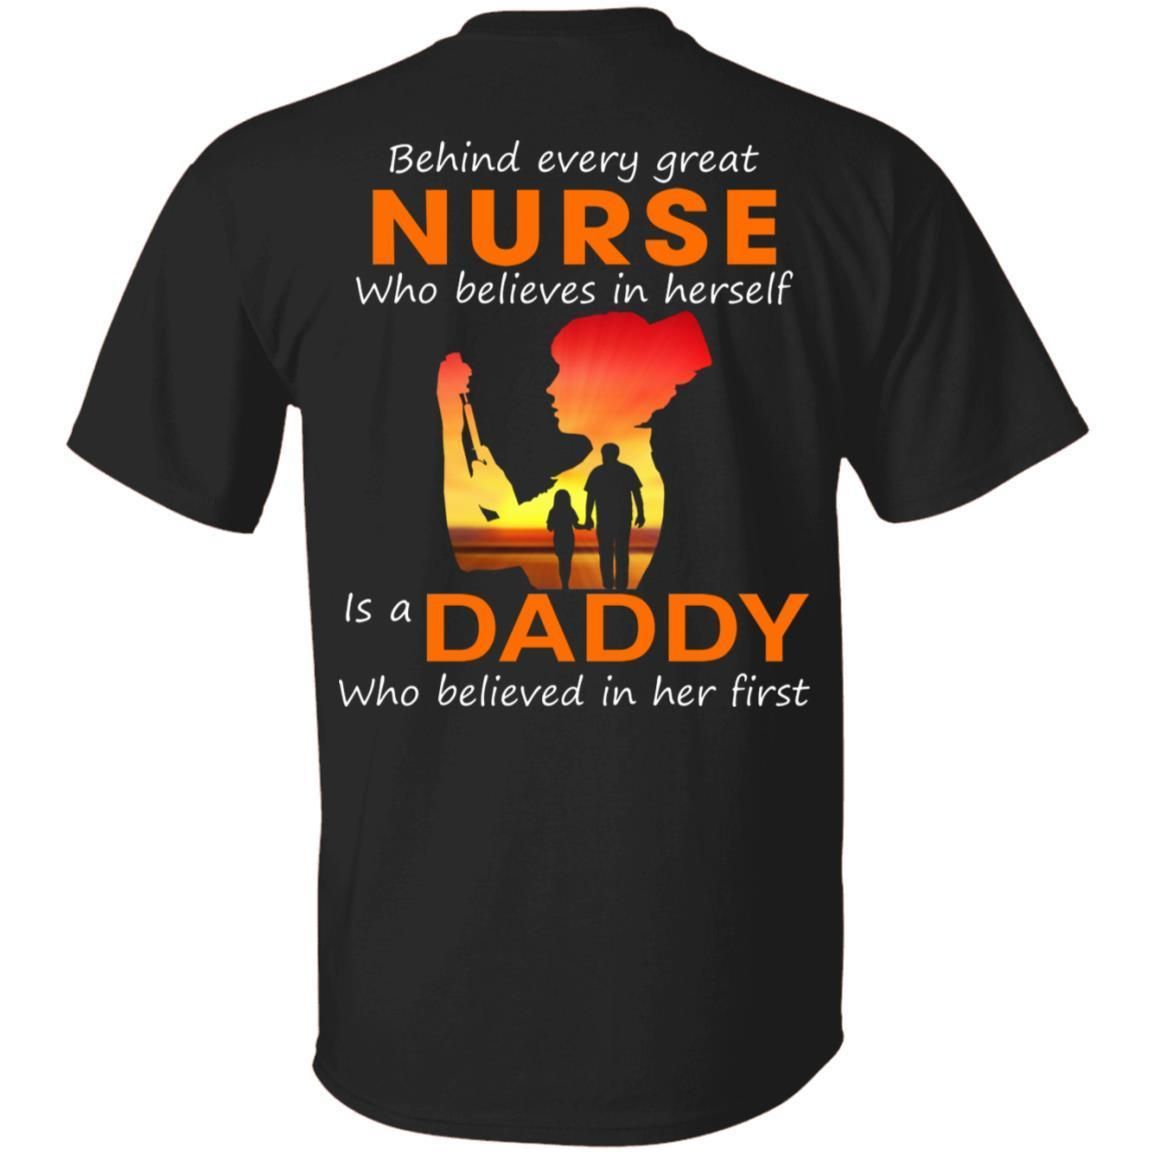 Behind Every Great Nurse who believes in herself is a Daddy shirts back side